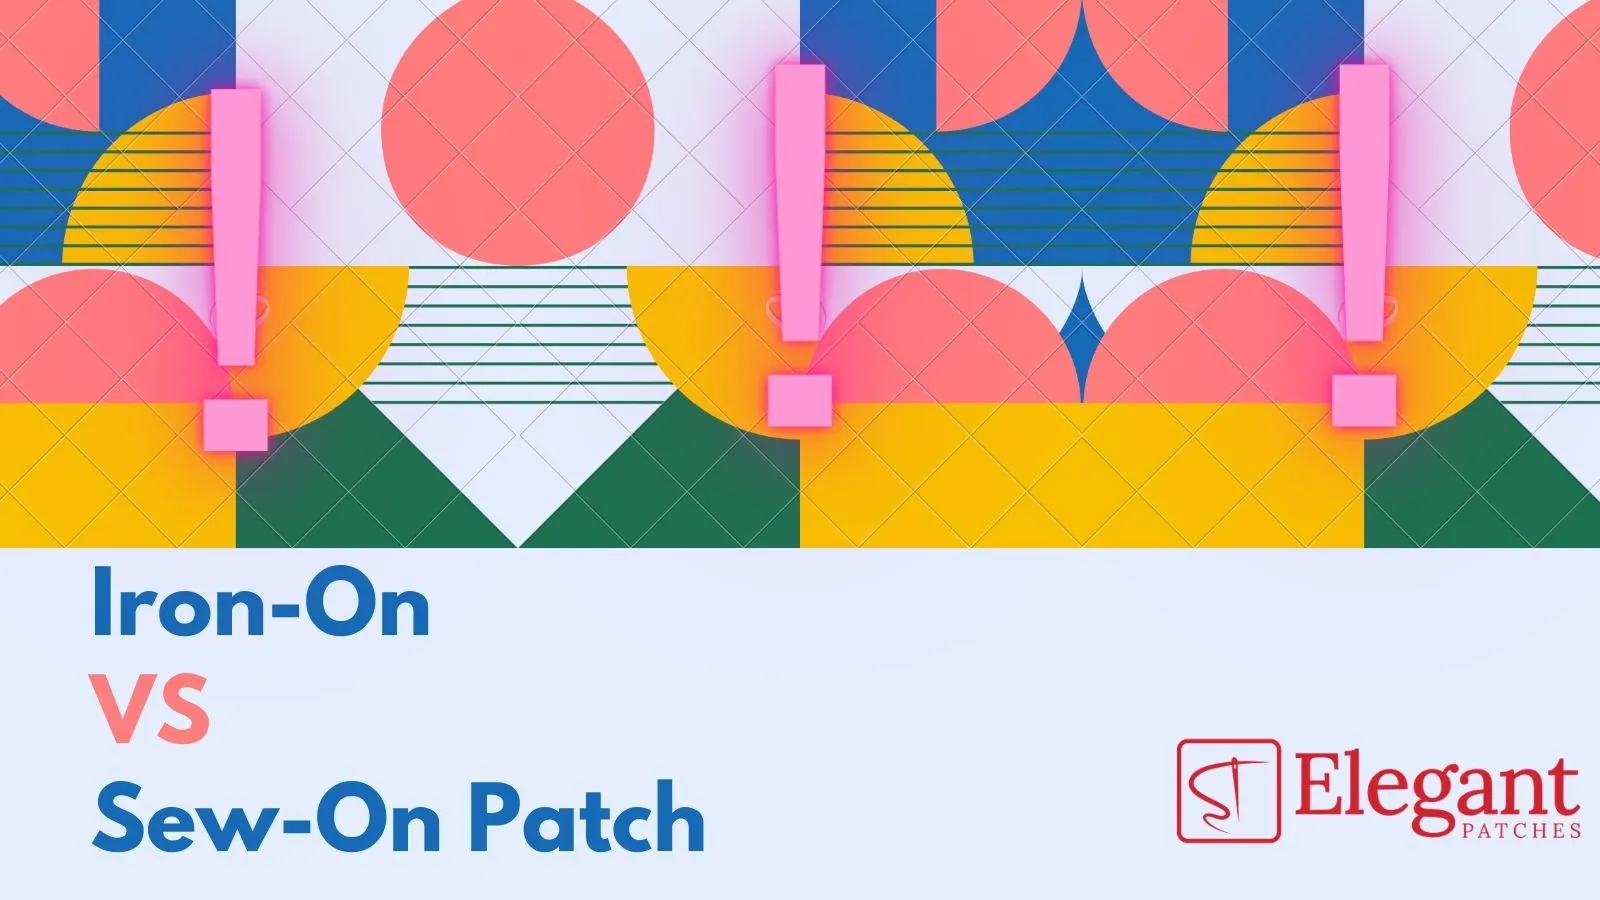 Iron-On VS Sew-On Patch - Which One is More Effective?